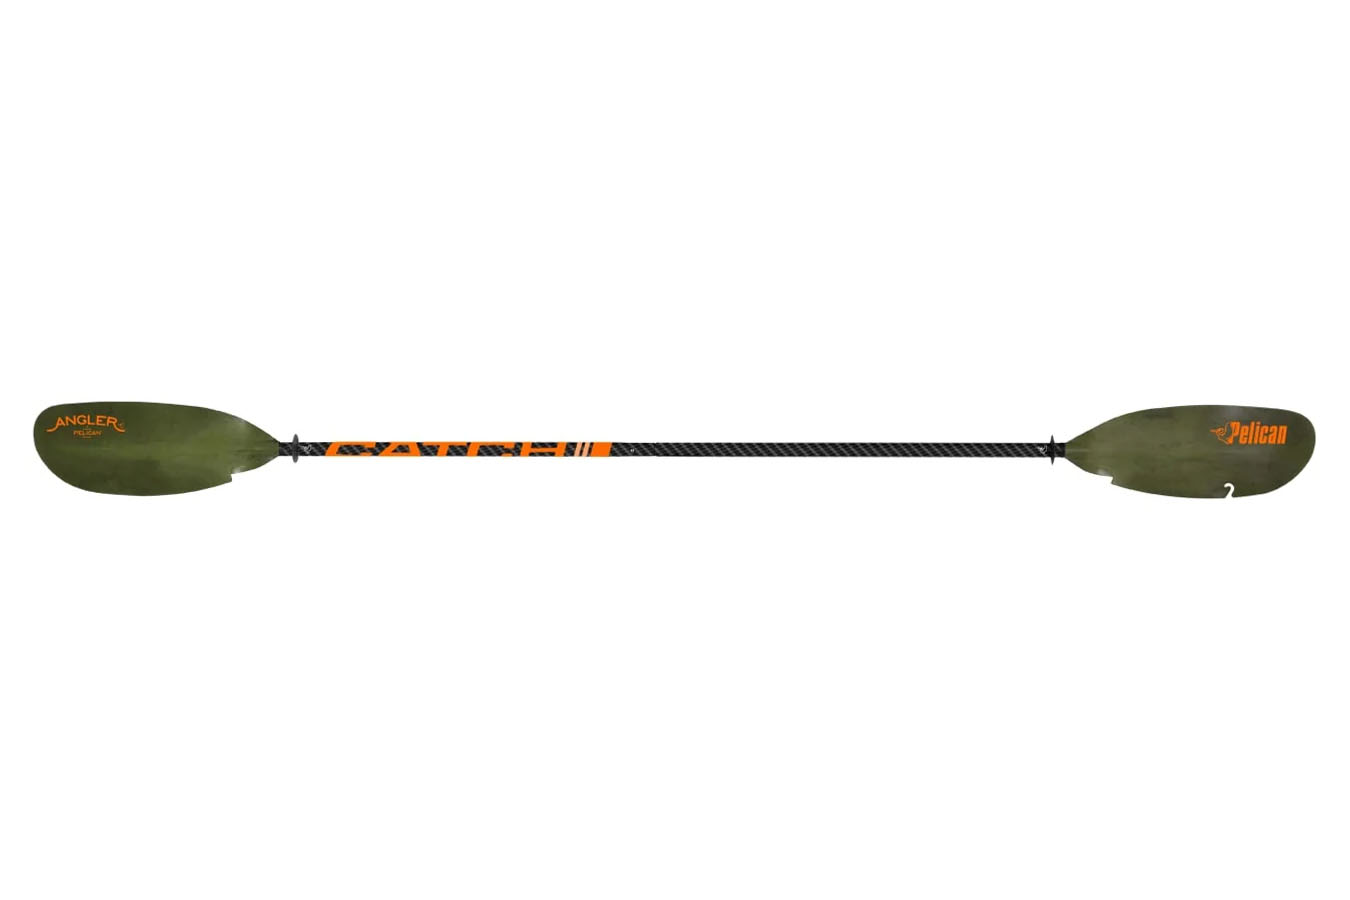 Pelican Boats Catch Fishing Kayak Paddle in Olive Camo for Sale, Online  Boating & Marine Store